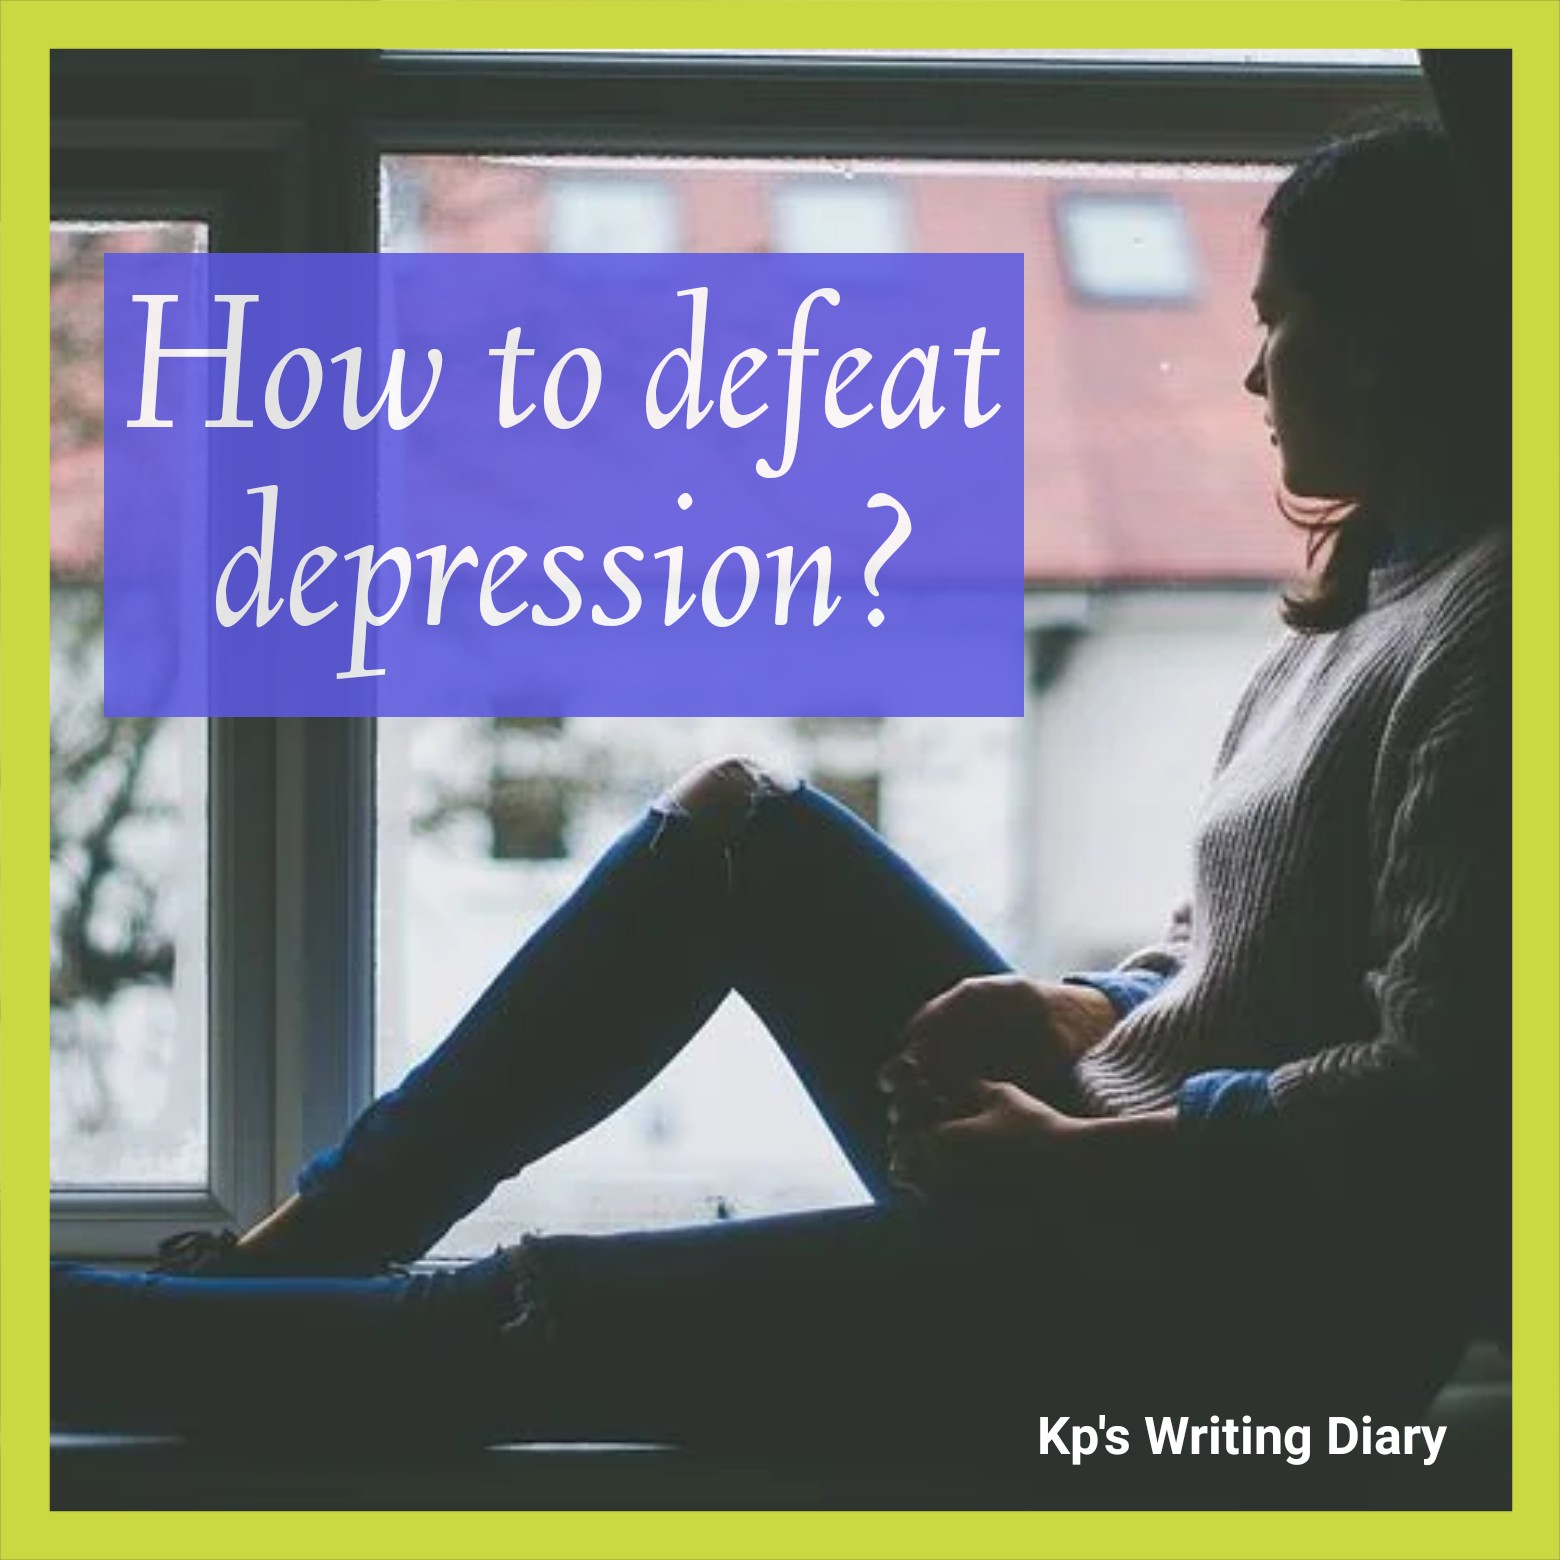 How to defeat depression